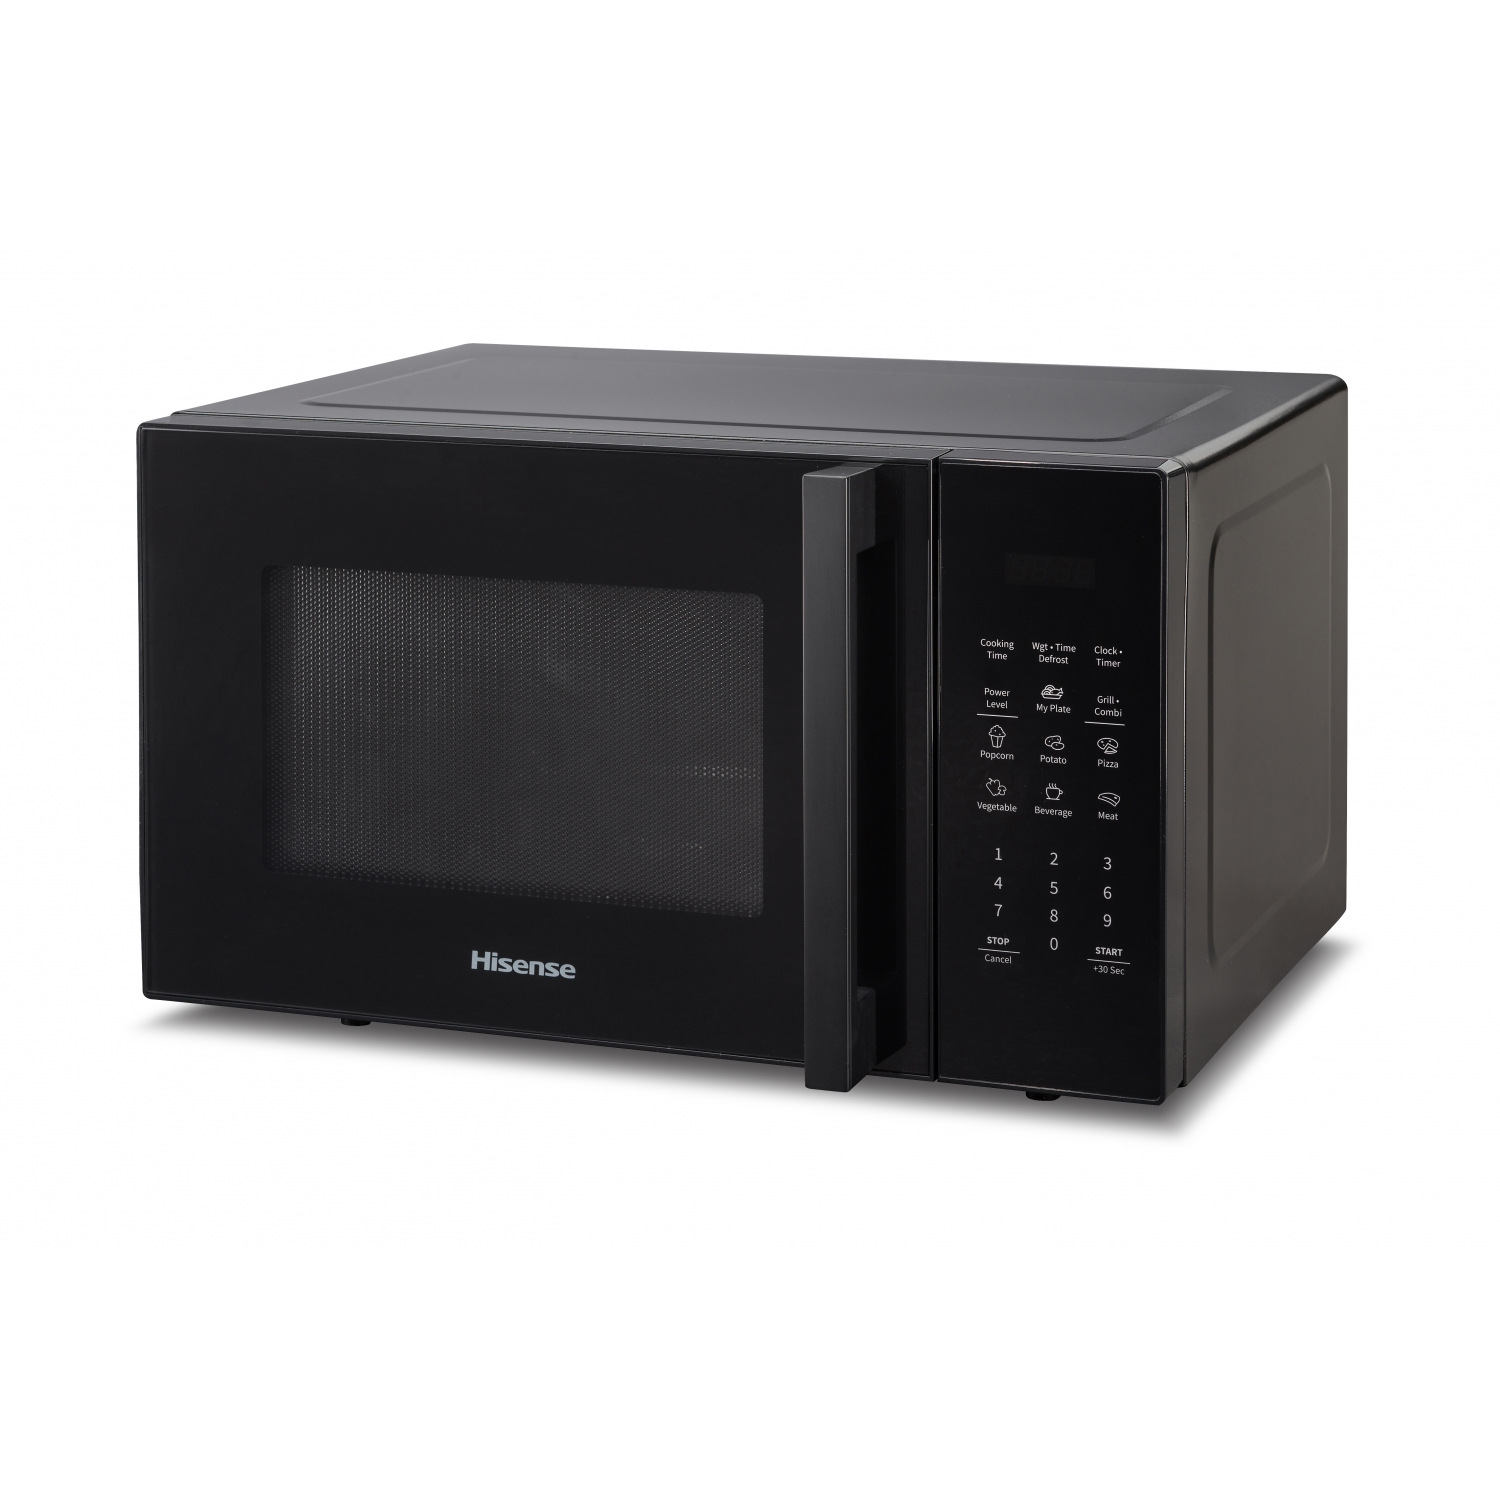 Hisense H28MOBS8HGUK 28 Litre Microwave with Grill - Black - 6